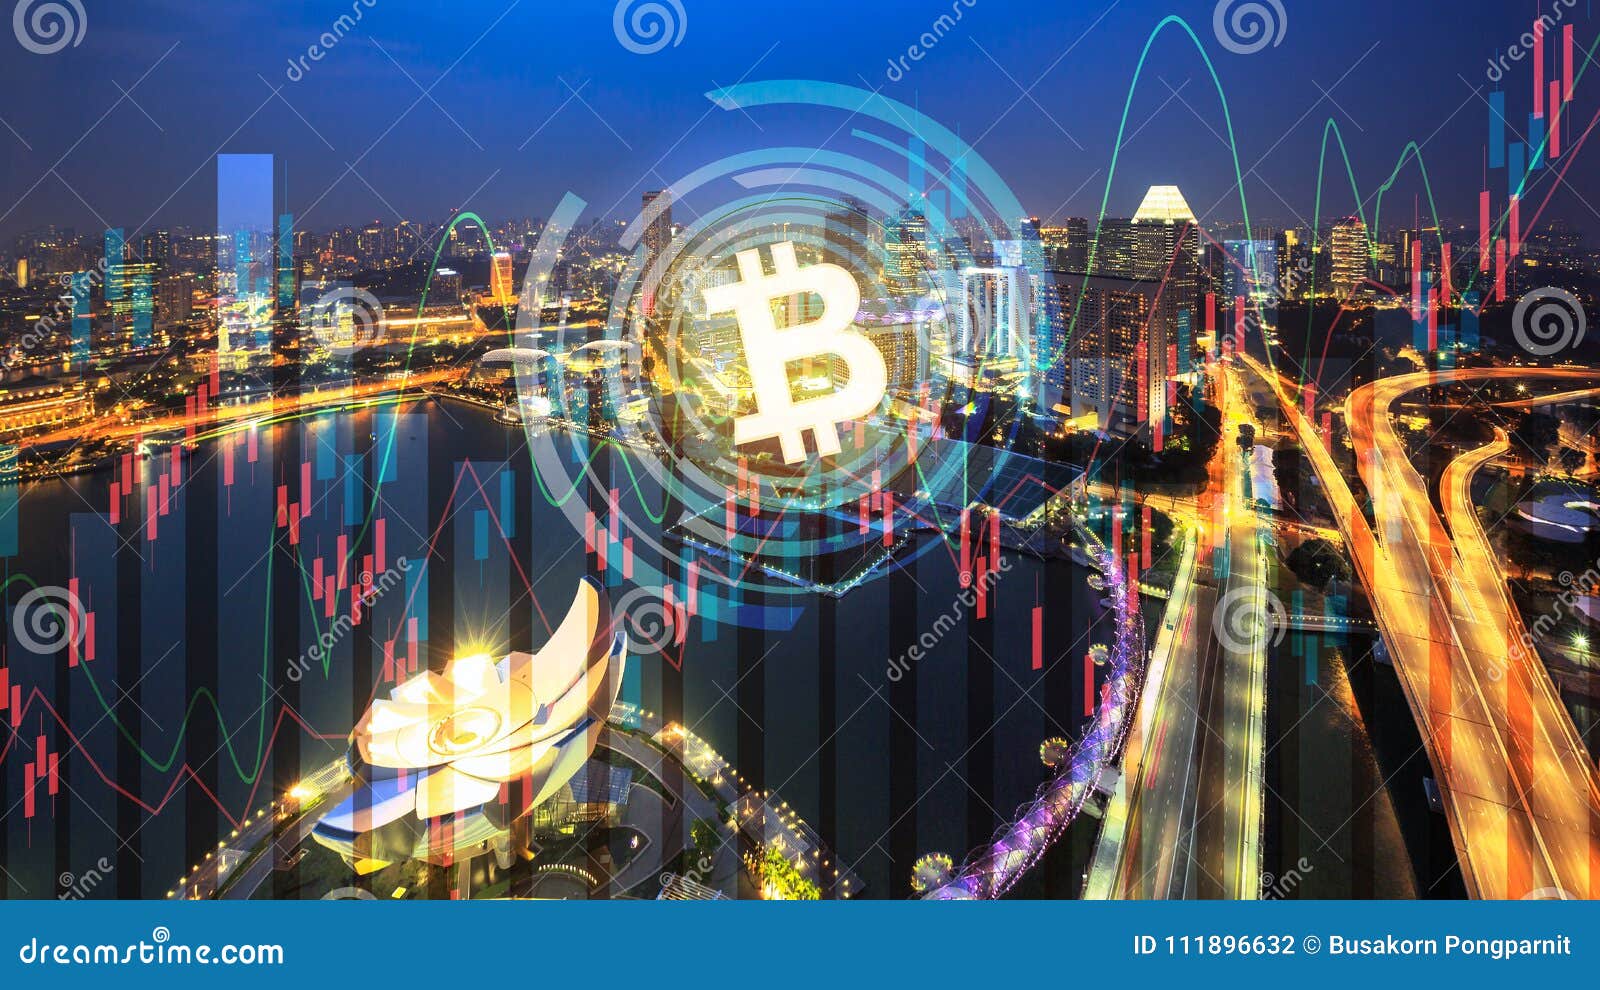 bitcoin trading exchange stock market investment business graph on city